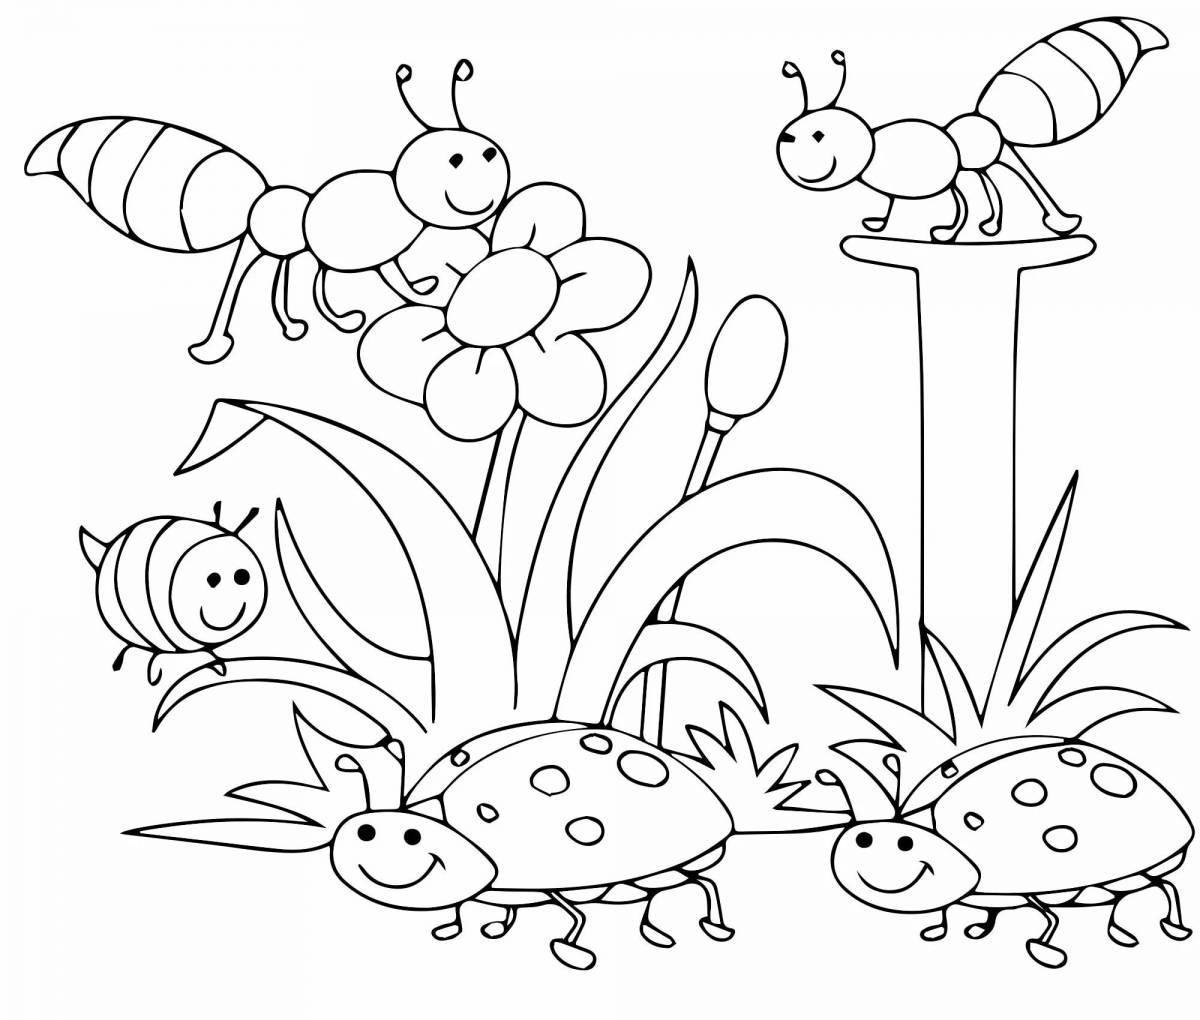 Colorful insect coloring page for 5-6 year olds